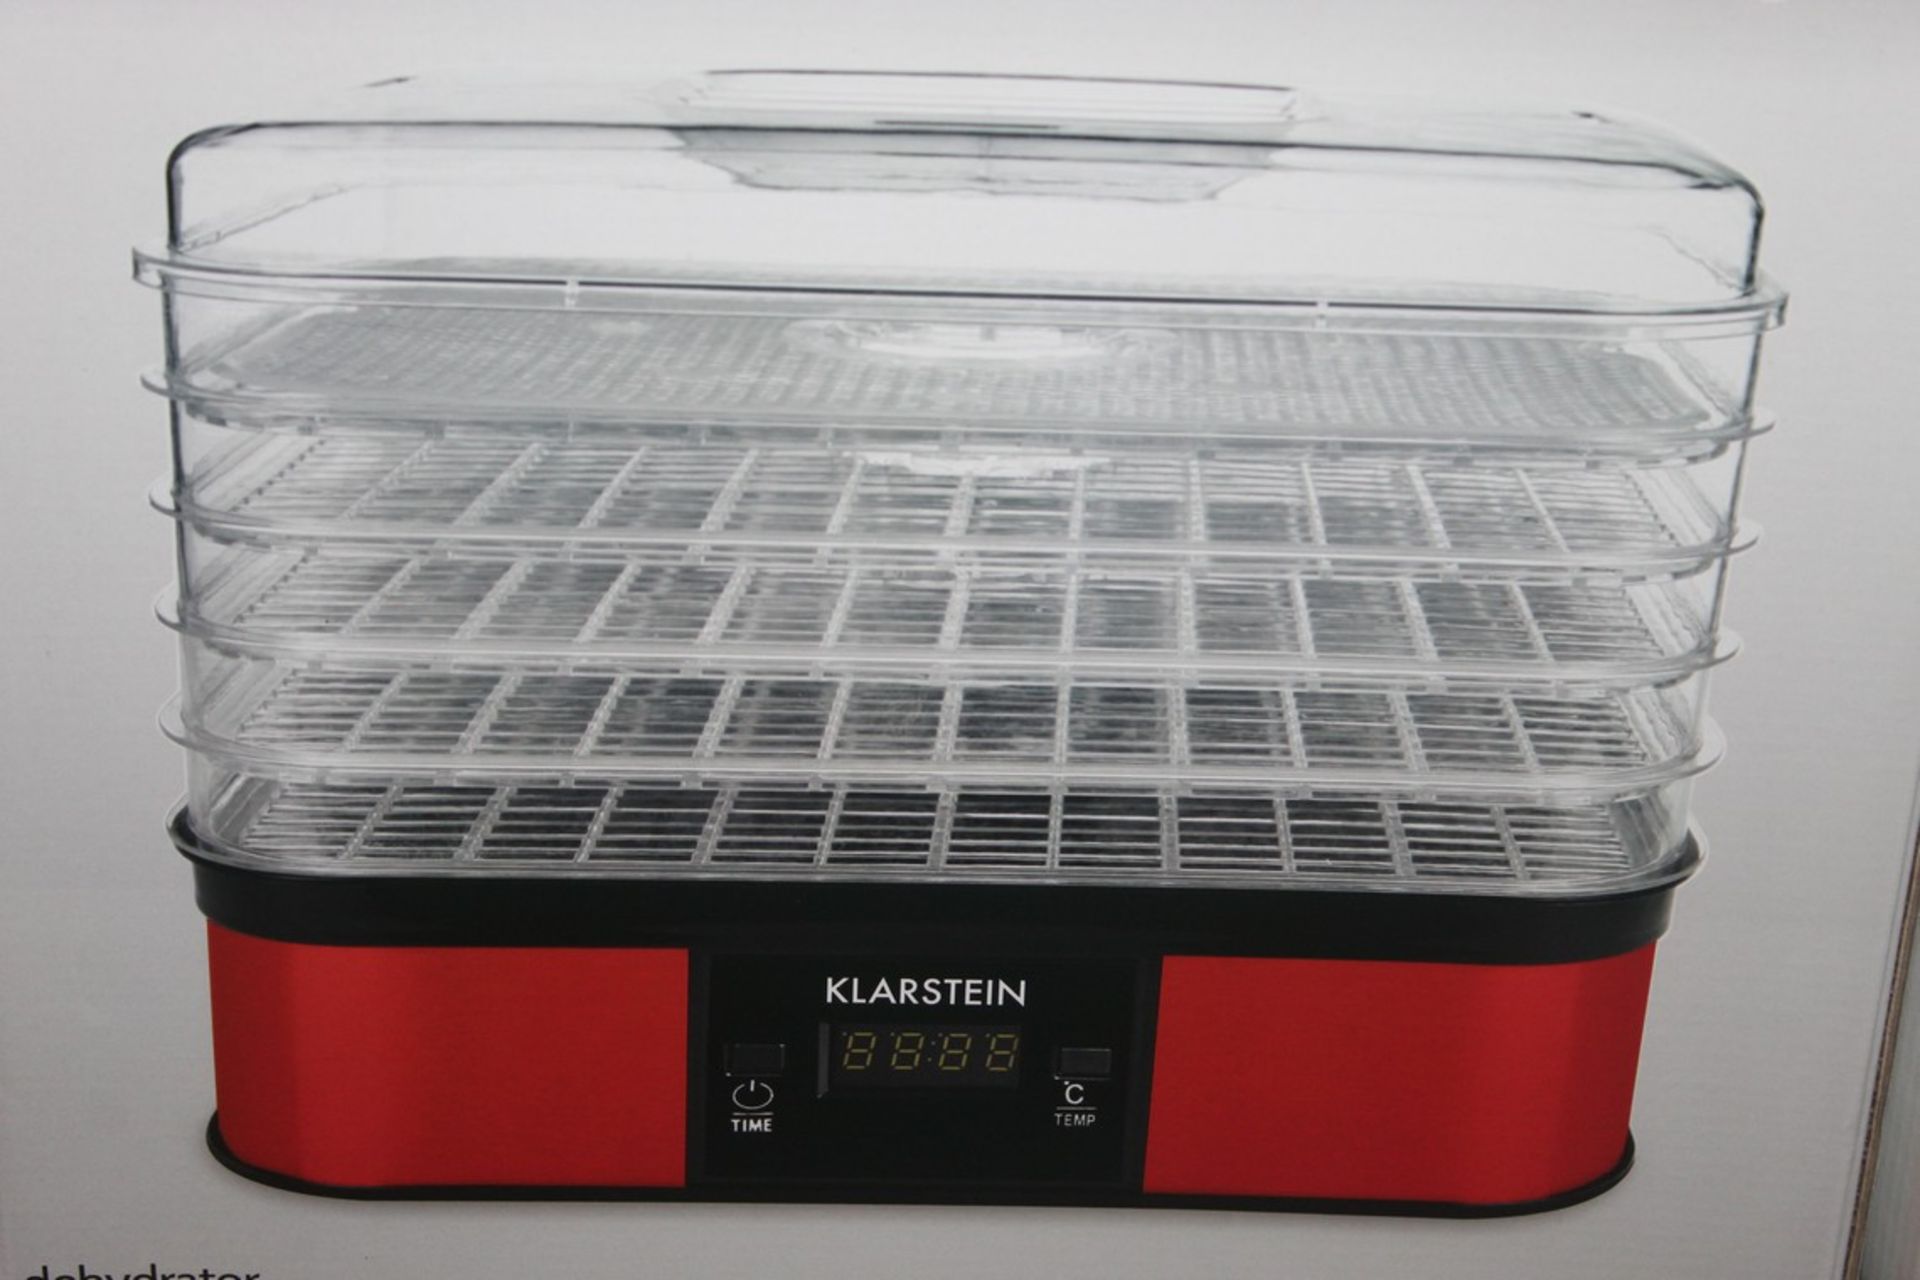 Boxed Klarstein Food Dehydrator RRP £60 (16253) (10.01.20) (Public Viewing and Appraisals